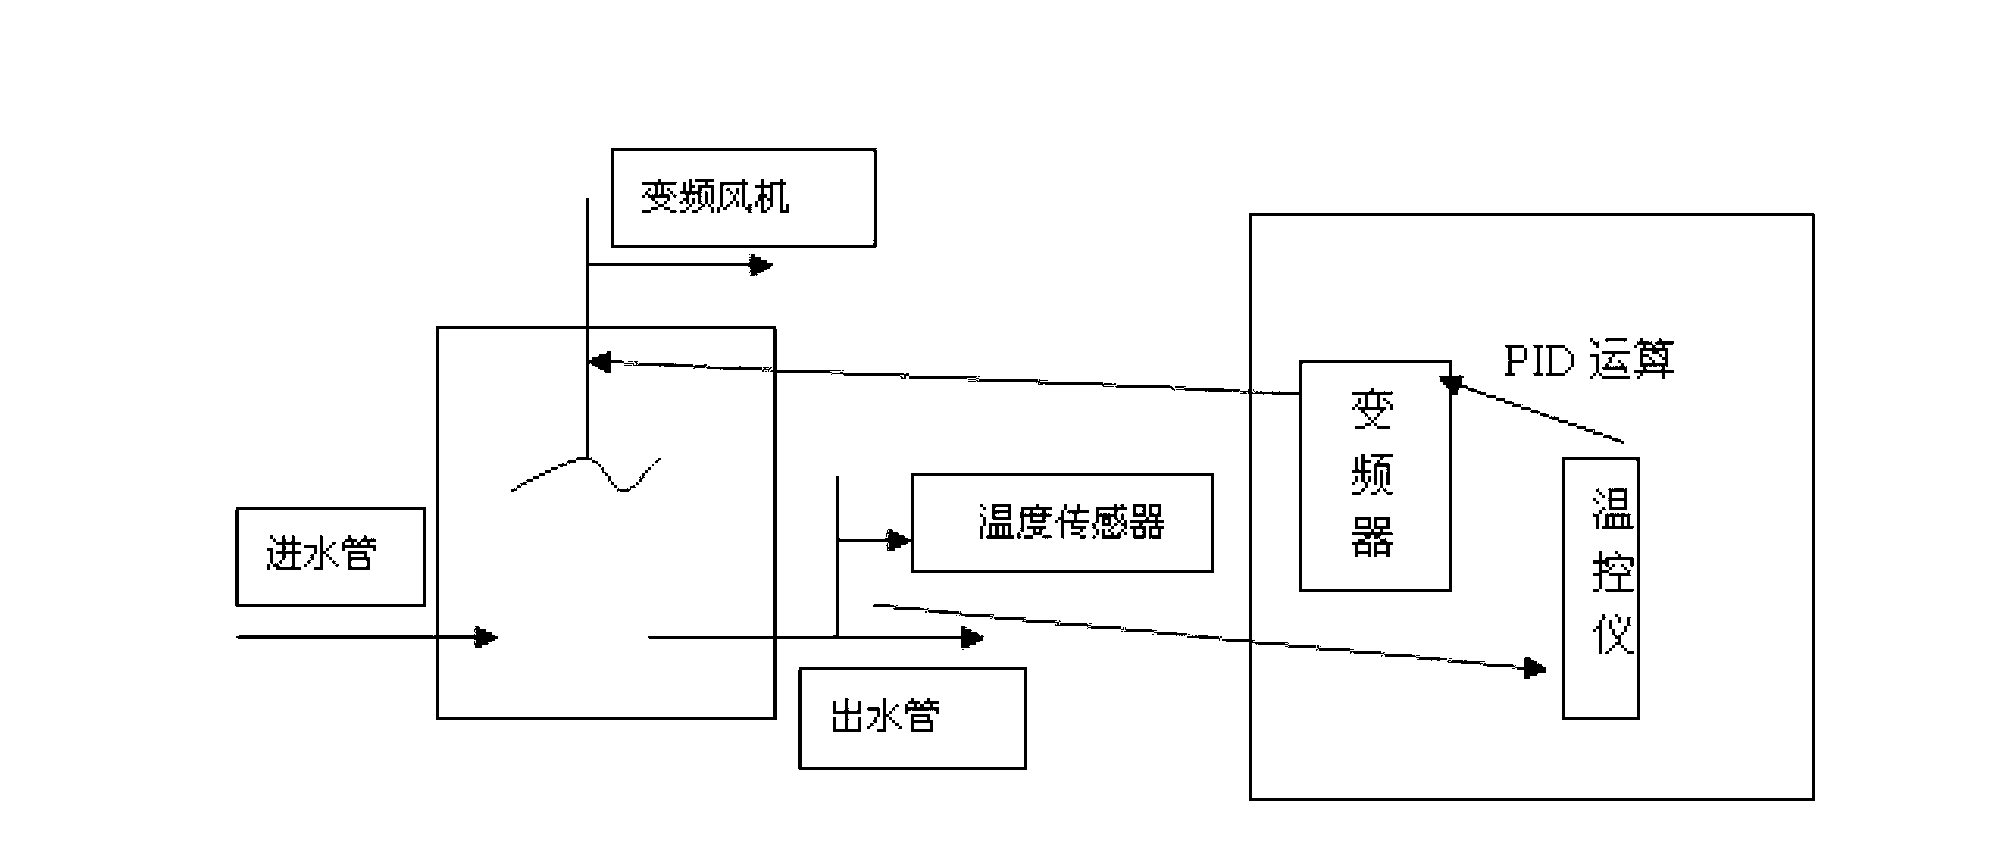 Constant temperature control system for closed cooling tower